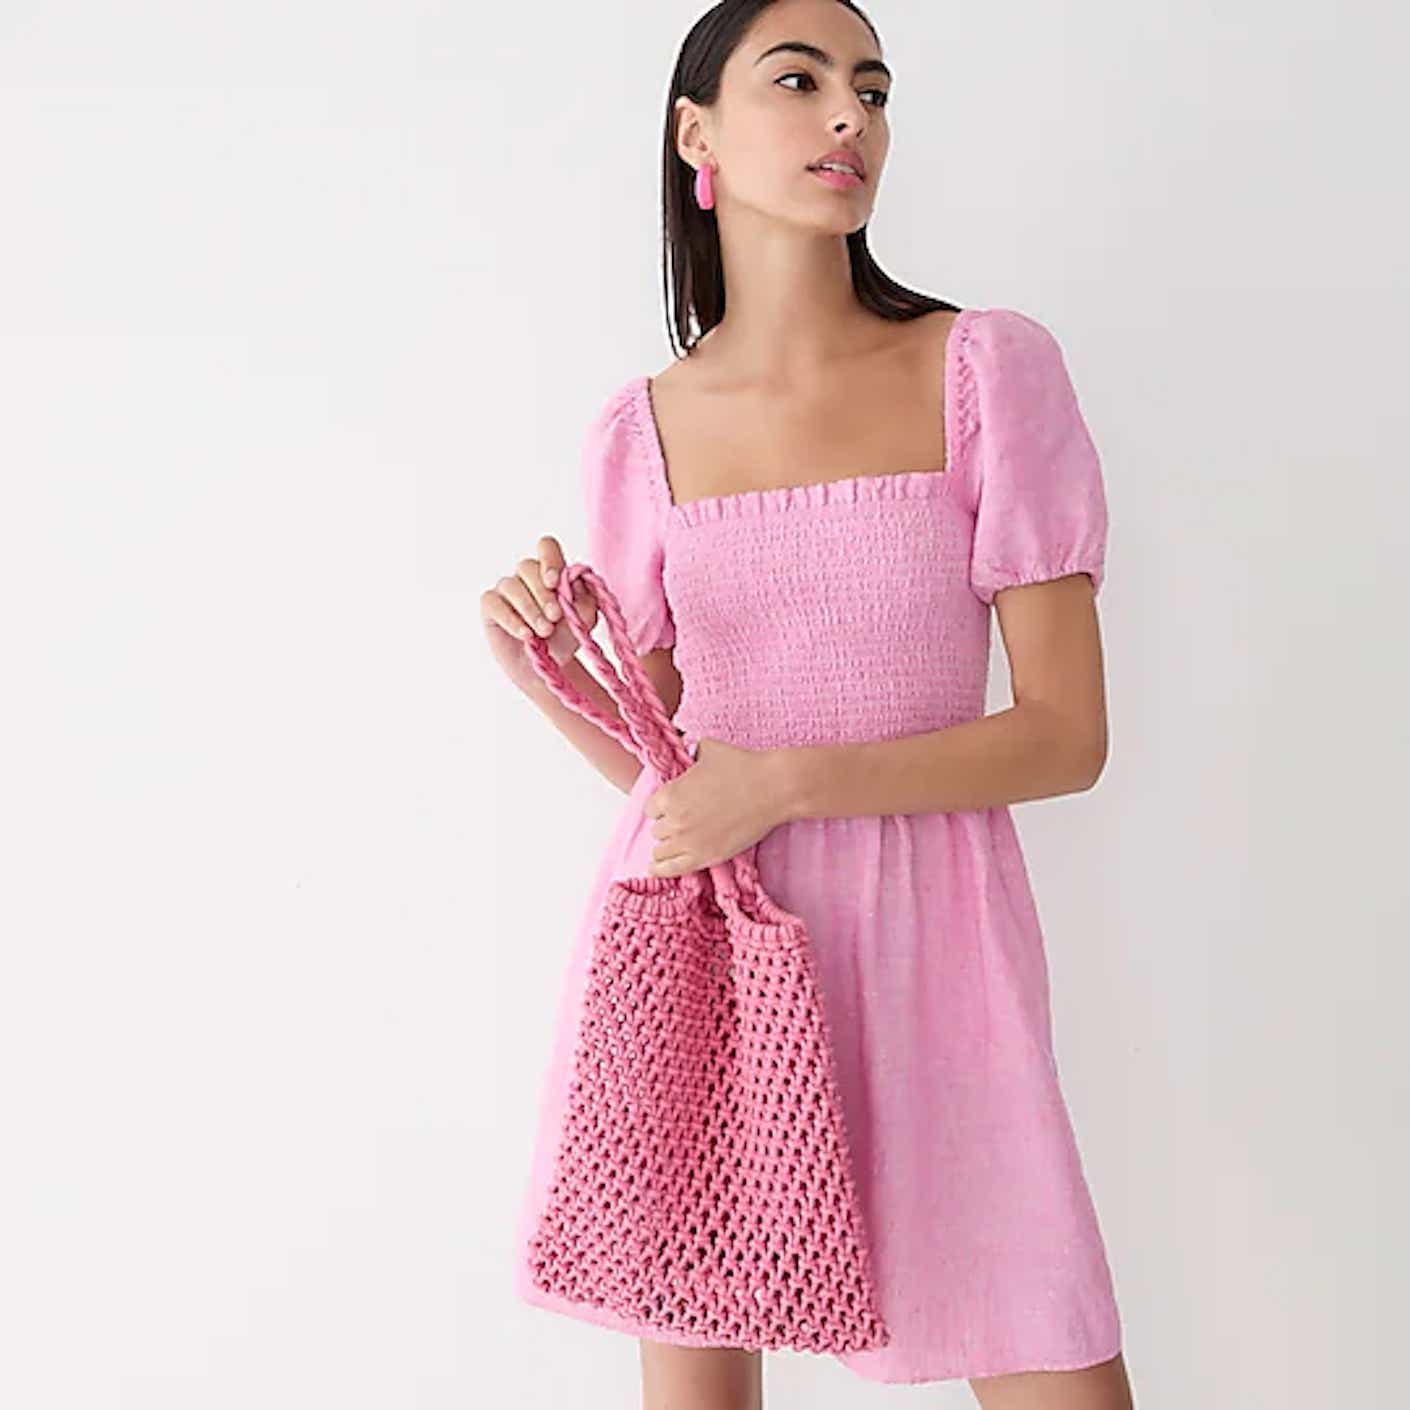 A woman wears a lightweight, soft pink mini dress with a smocked bodice and short, puffed sleeves.